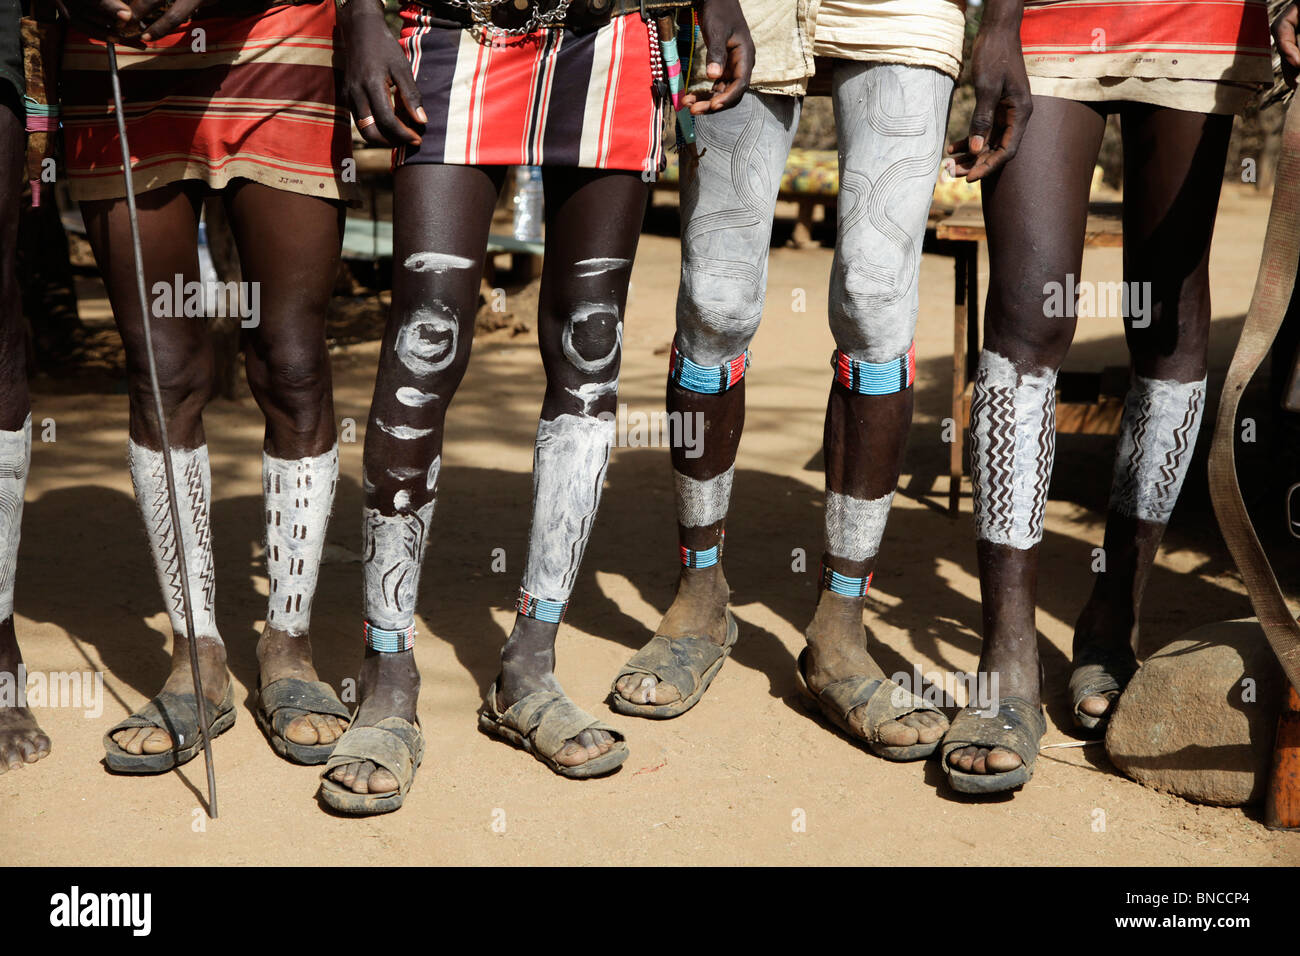 Tsemai men from Southern Ethiopia are showing off their leg body painting Stock Photo